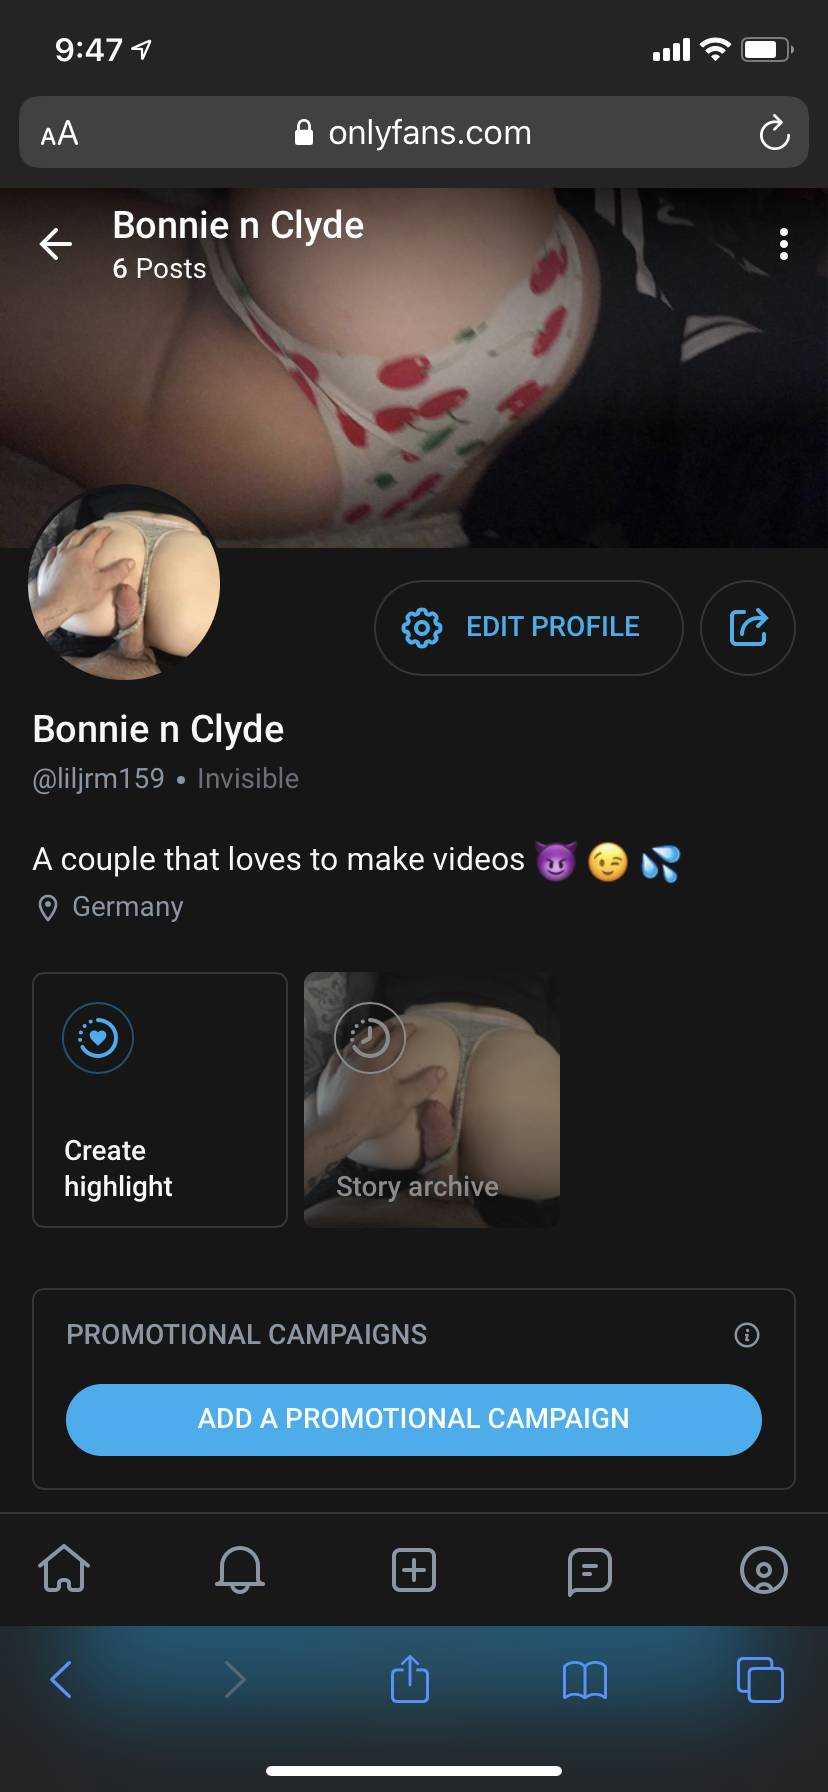 Watch the Photo by Bonnie n clyde with the username @liljman58, posted on August 26, 2020. The post is about the topic blowjob.